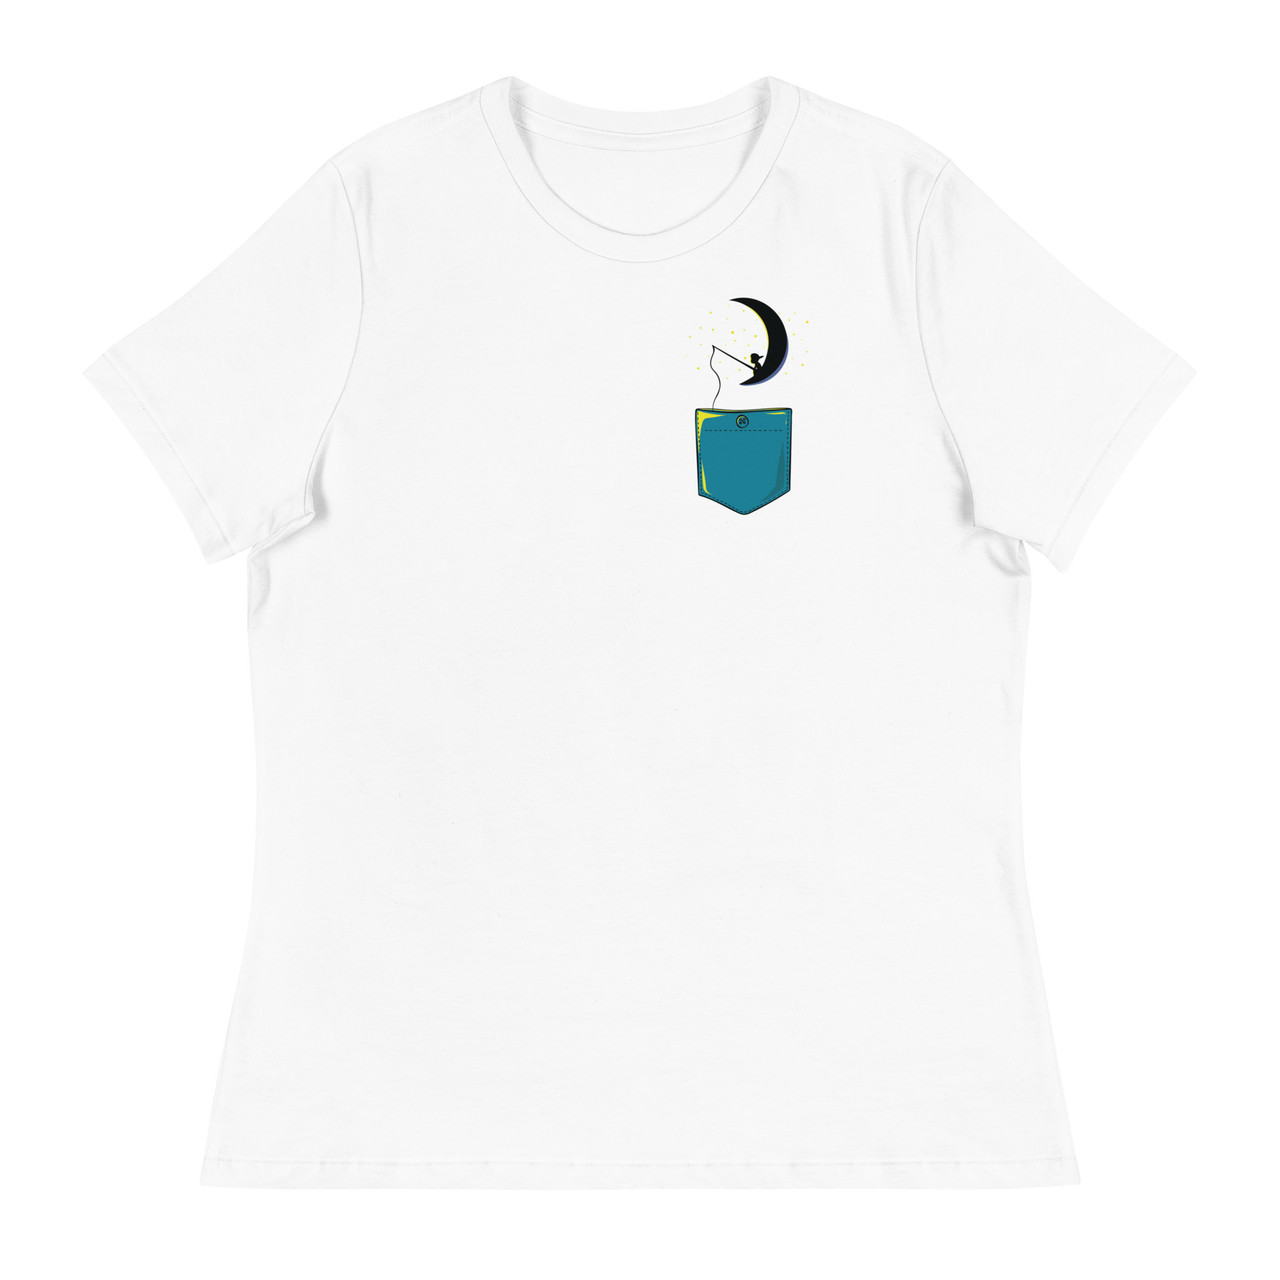 Child On Moon Pocket Women's Relaxed T-Shirt - Bella + Canvas 6400 